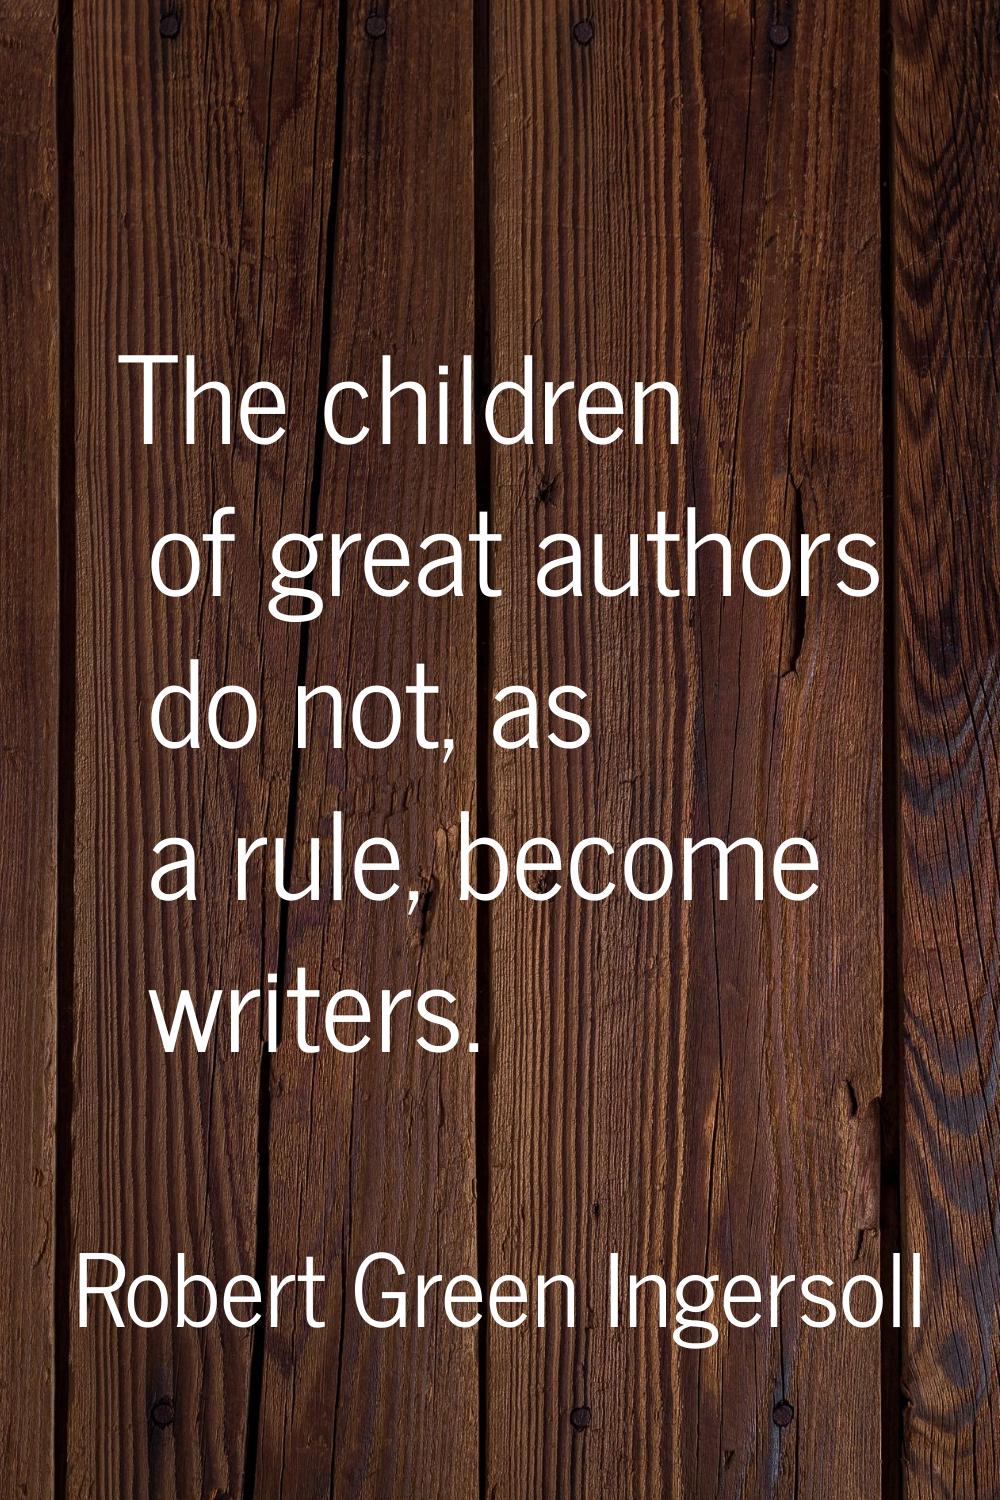 The children of great authors do not, as a rule, become writers.